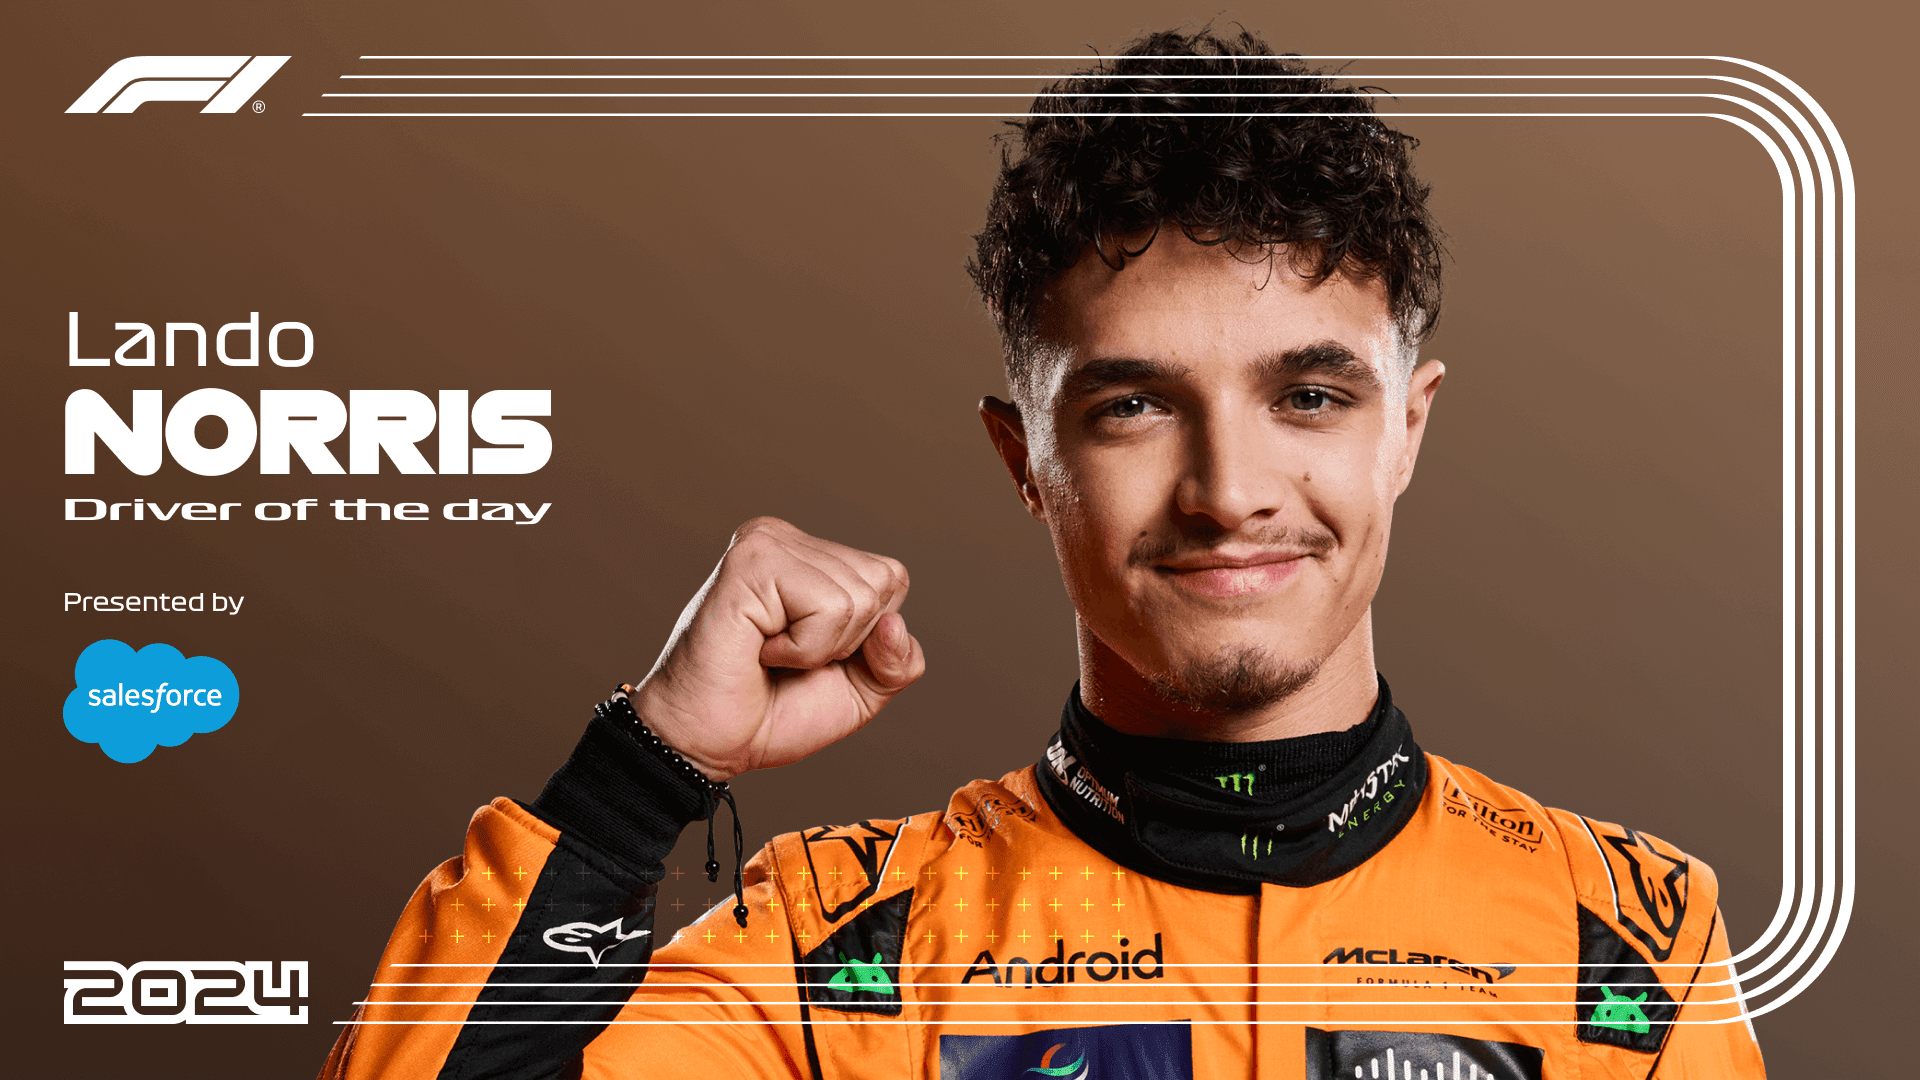 DRIVER OF THE DAY: Hard-charging Norris gets your vote after coming oh-so-close to Imola victory